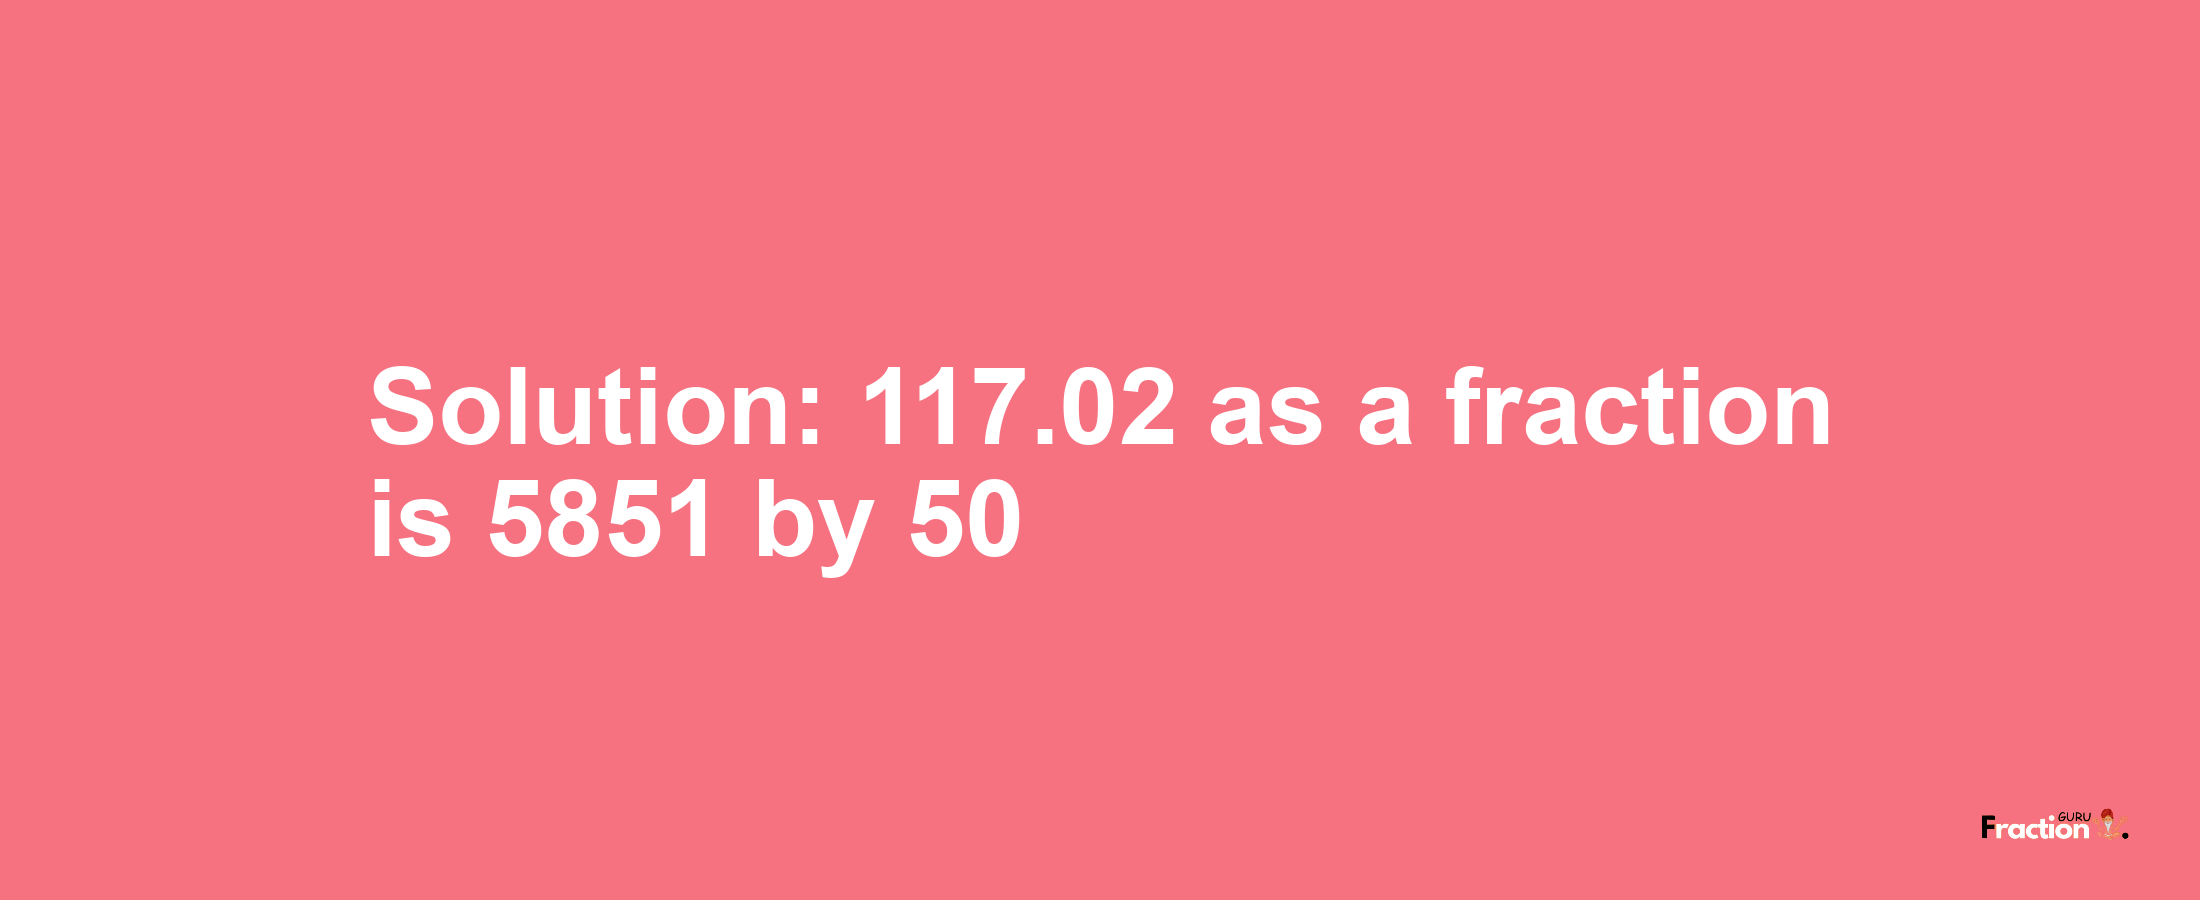 Solution:117.02 as a fraction is 5851/50